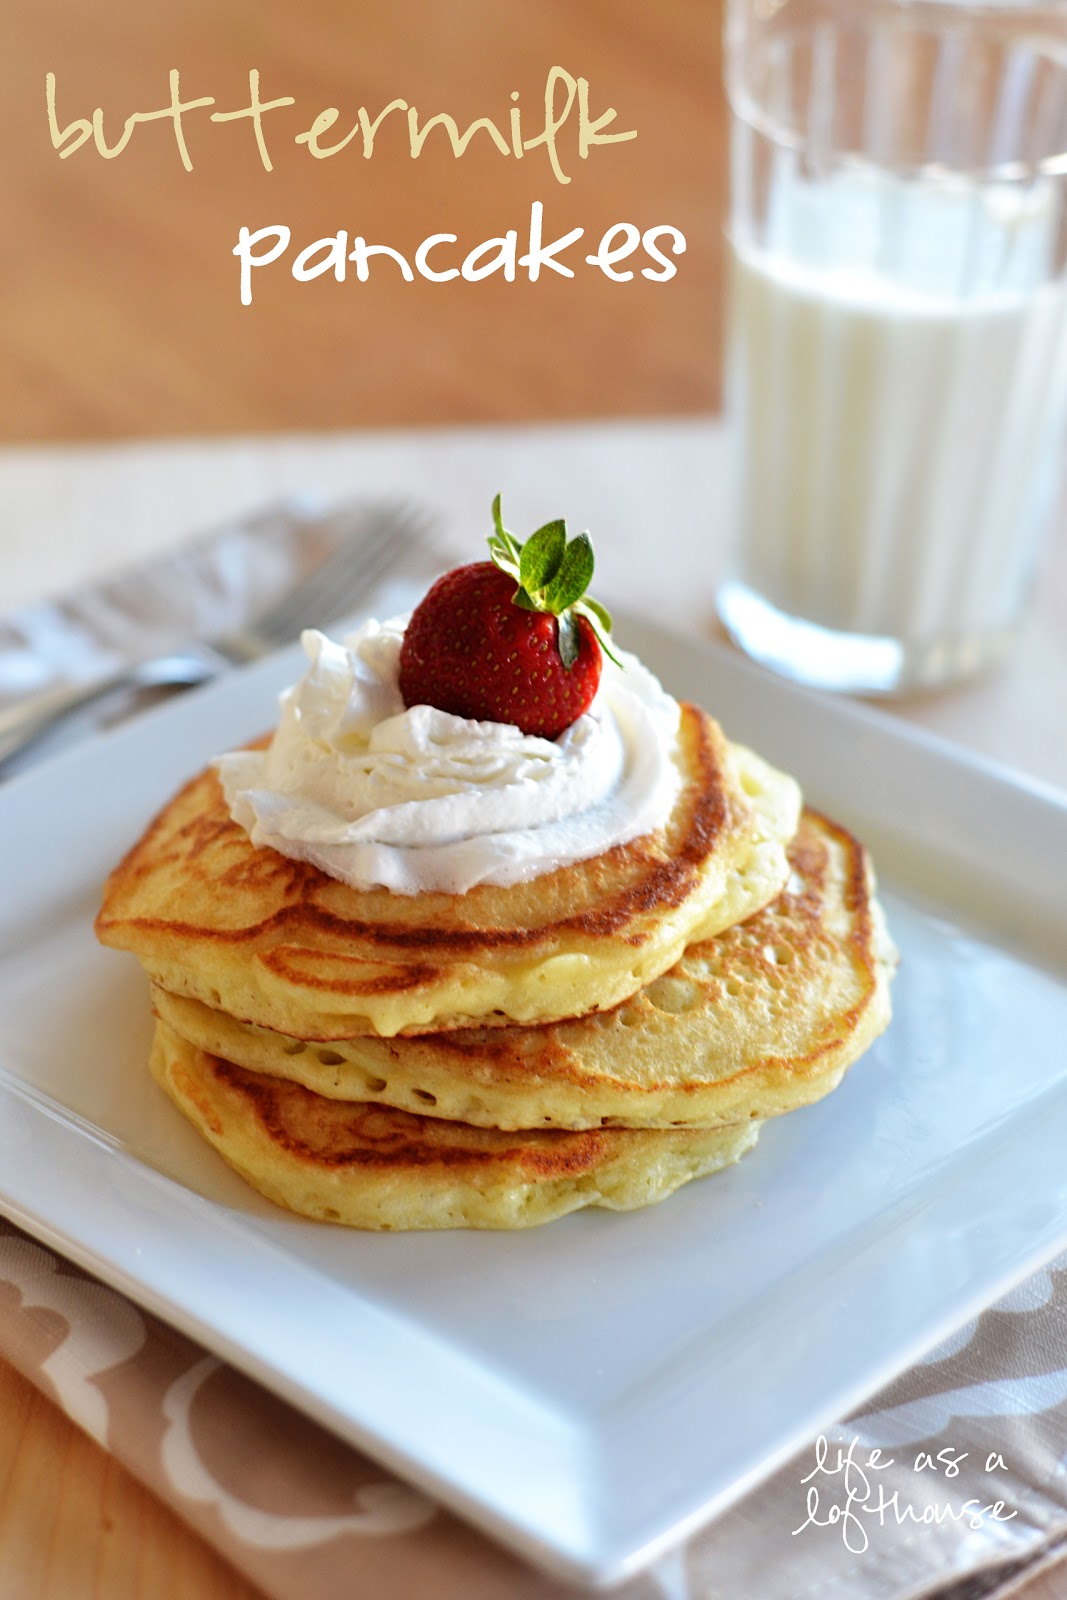 make  to bisquick pancakes Buttermilk how buttermilk Pancakes with